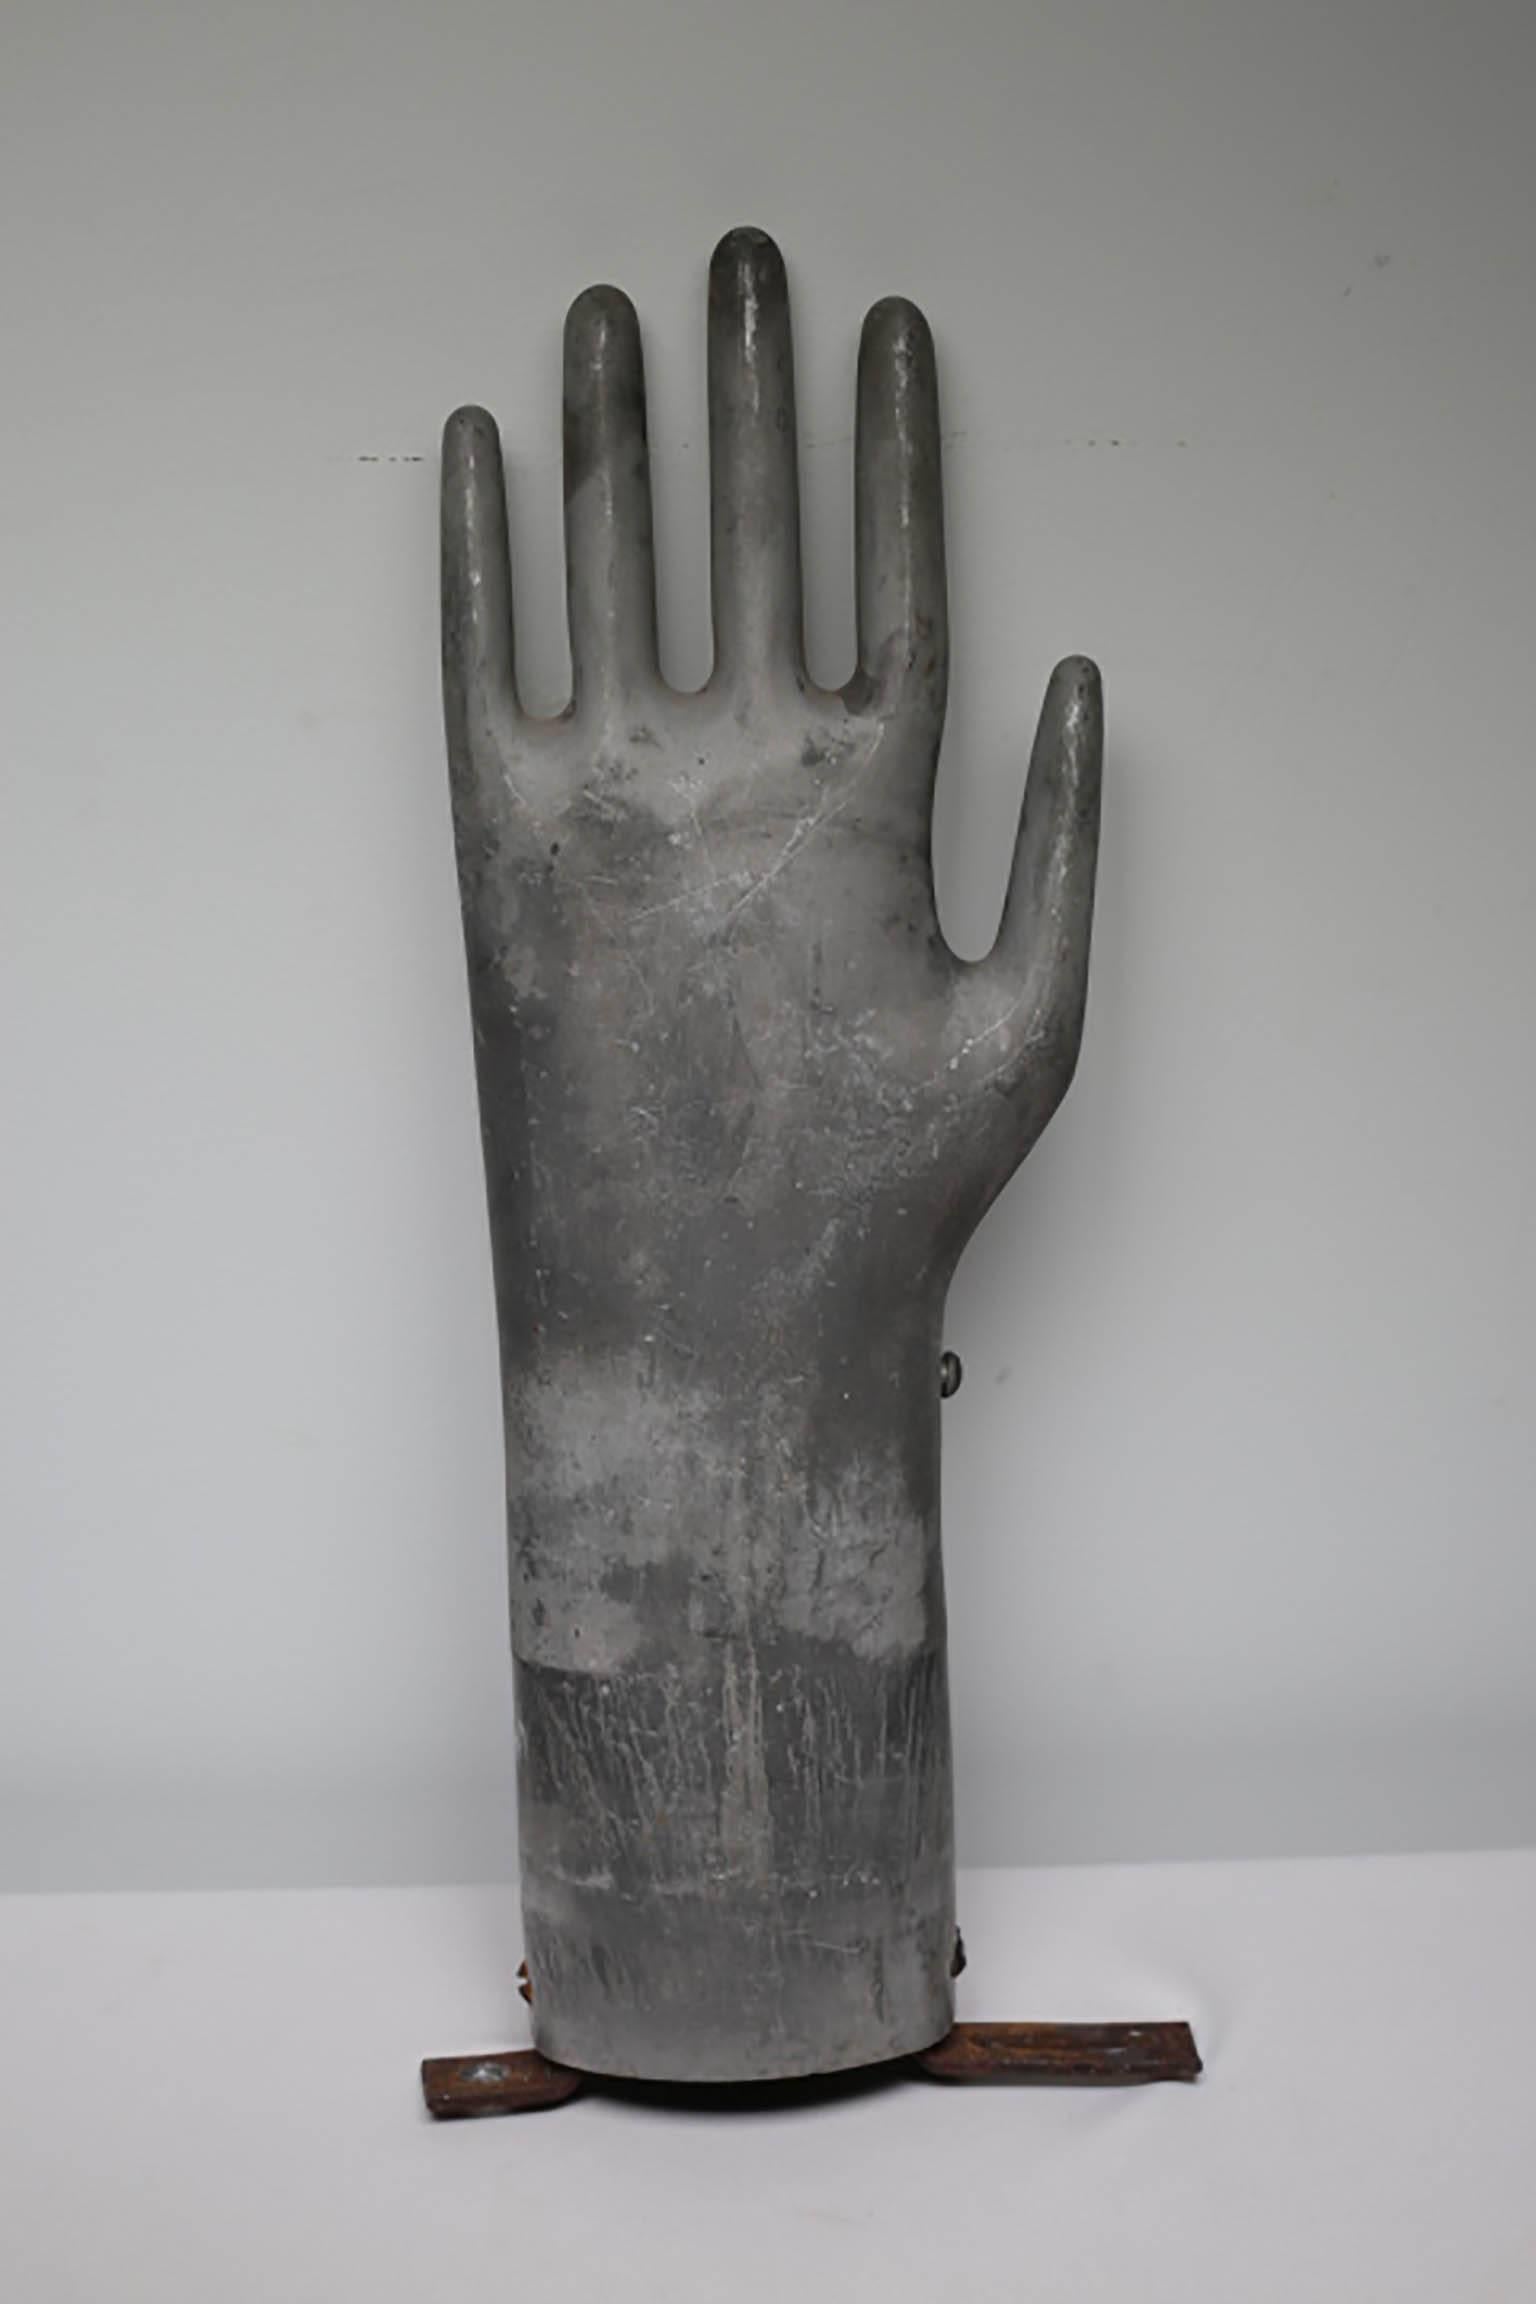 Mountable aluminum glove mold with steel bracket circa 1950s-1960s. Mount on the wall to use as a coat hook, towel hook or just by itself.